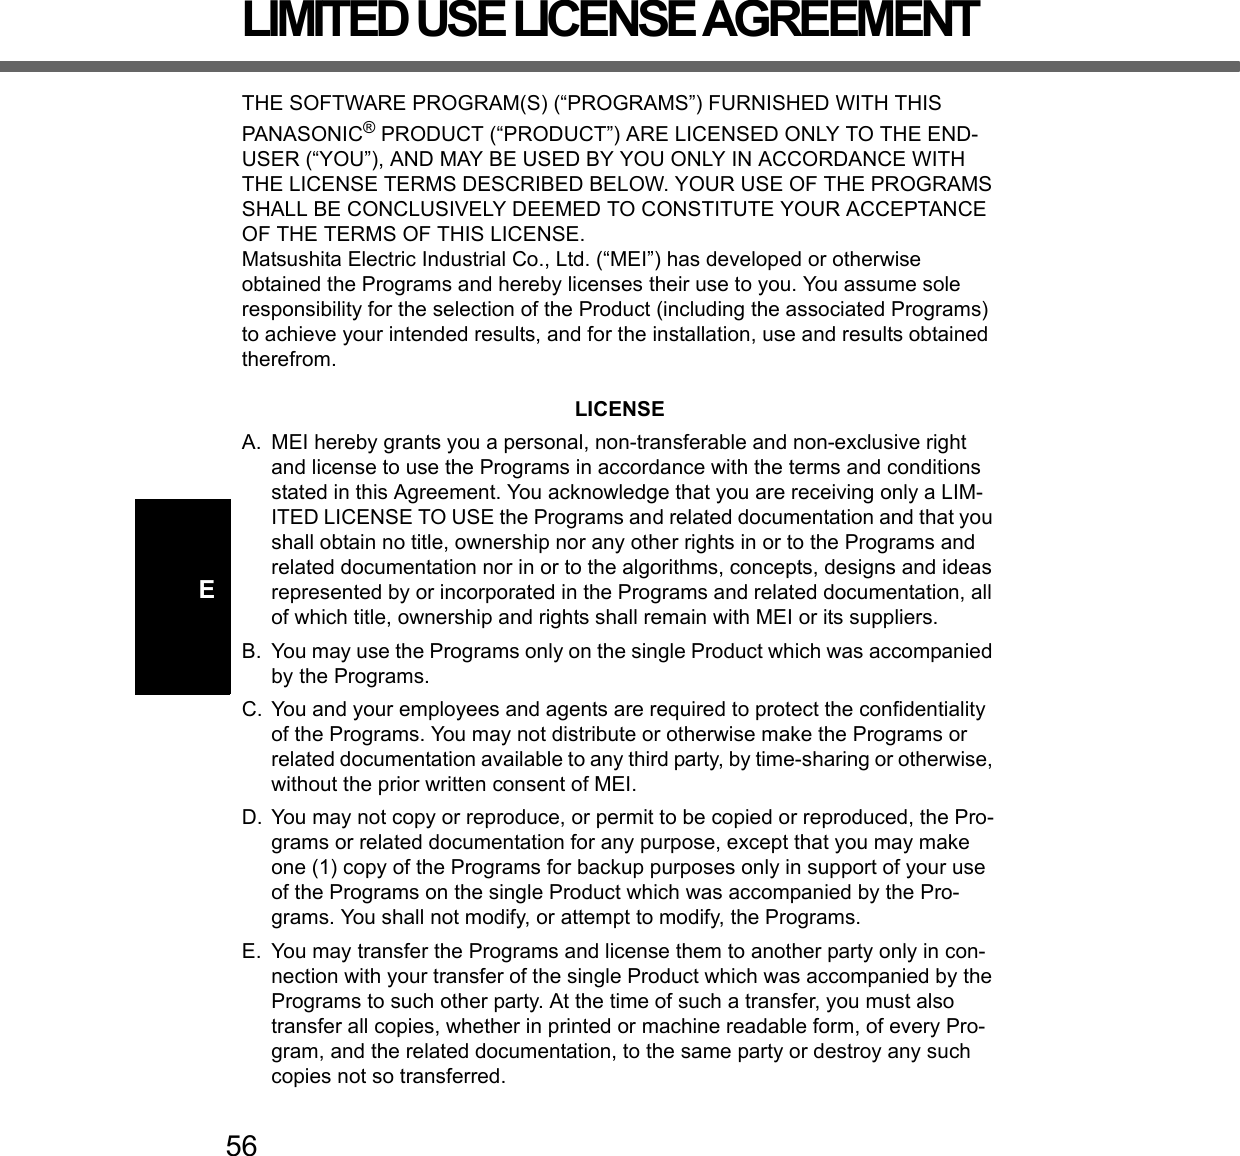 56ELIMITED USE LICENSE AGREEMENTTHE SOFTWARE PROGRAM(S) (“PROGRAMS”) FURNISHED WITH THIS PANASONIC® PRODUCT (“PRODUCT”) ARE LICENSED ONLY TO THE END-USER (“YOU”), AND MAY BE USED BY YOU ONLY IN ACCORDANCE WITH THE LICENSE TERMS DESCRIBED BELOW. YOUR USE OF THE PROGRAMS SHALL BE CONCLUSIVELY DEEMED TO CONSTITUTE YOUR ACCEPTANCE OF THE TERMS OF THIS LICENSE.Matsushita Electric Industrial Co., Ltd. (“MEI”) has developed or otherwise obtained the Programs and hereby licenses their use to you. You assume sole responsibility for the selection of the Product (including the associated Programs) to achieve your intended results, and for the installation, use and results obtained therefrom.LICENSEA. MEI hereby grants you a personal, non-transferable and non-exclusive right and license to use the Programs in accordance with the terms and conditions stated in this Agreement. You acknowledge that you are receiving only a LIM-ITED LICENSE TO USE the Programs and related documentation and that you shall obtain no title, ownership nor any other rights in or to the Programs and related documentation nor in or to the algorithms, concepts, designs and ideas represented by or incorporated in the Programs and related documentation, all of which title, ownership and rights shall remain with MEI or its suppliers.B. You may use the Programs only on the single Product which was accompanied by the Programs.C. You and your employees and agents are required to protect the confidentiality of the Programs. You may not distribute or otherwise make the Programs or related documentation available to any third party, by time-sharing or otherwise, without the prior written consent of MEI.D. You may not copy or reproduce, or permit to be copied or reproduced, the Pro-grams or related documentation for any purpose, except that you may make one (1) copy of the Programs for backup purposes only in support of your use of the Programs on the single Product which was accompanied by the Pro-grams. You shall not modify, or attempt to modify, the Programs.E. You may transfer the Programs and license them to another party only in con-nection with your transfer of the single Product which was accompanied by the Programs to such other party. At the time of such a transfer, you must also transfer all copies, whether in printed or machine readable form, of every Pro-gram, and the related documentation, to the same party or destroy any such copies not so transferred.